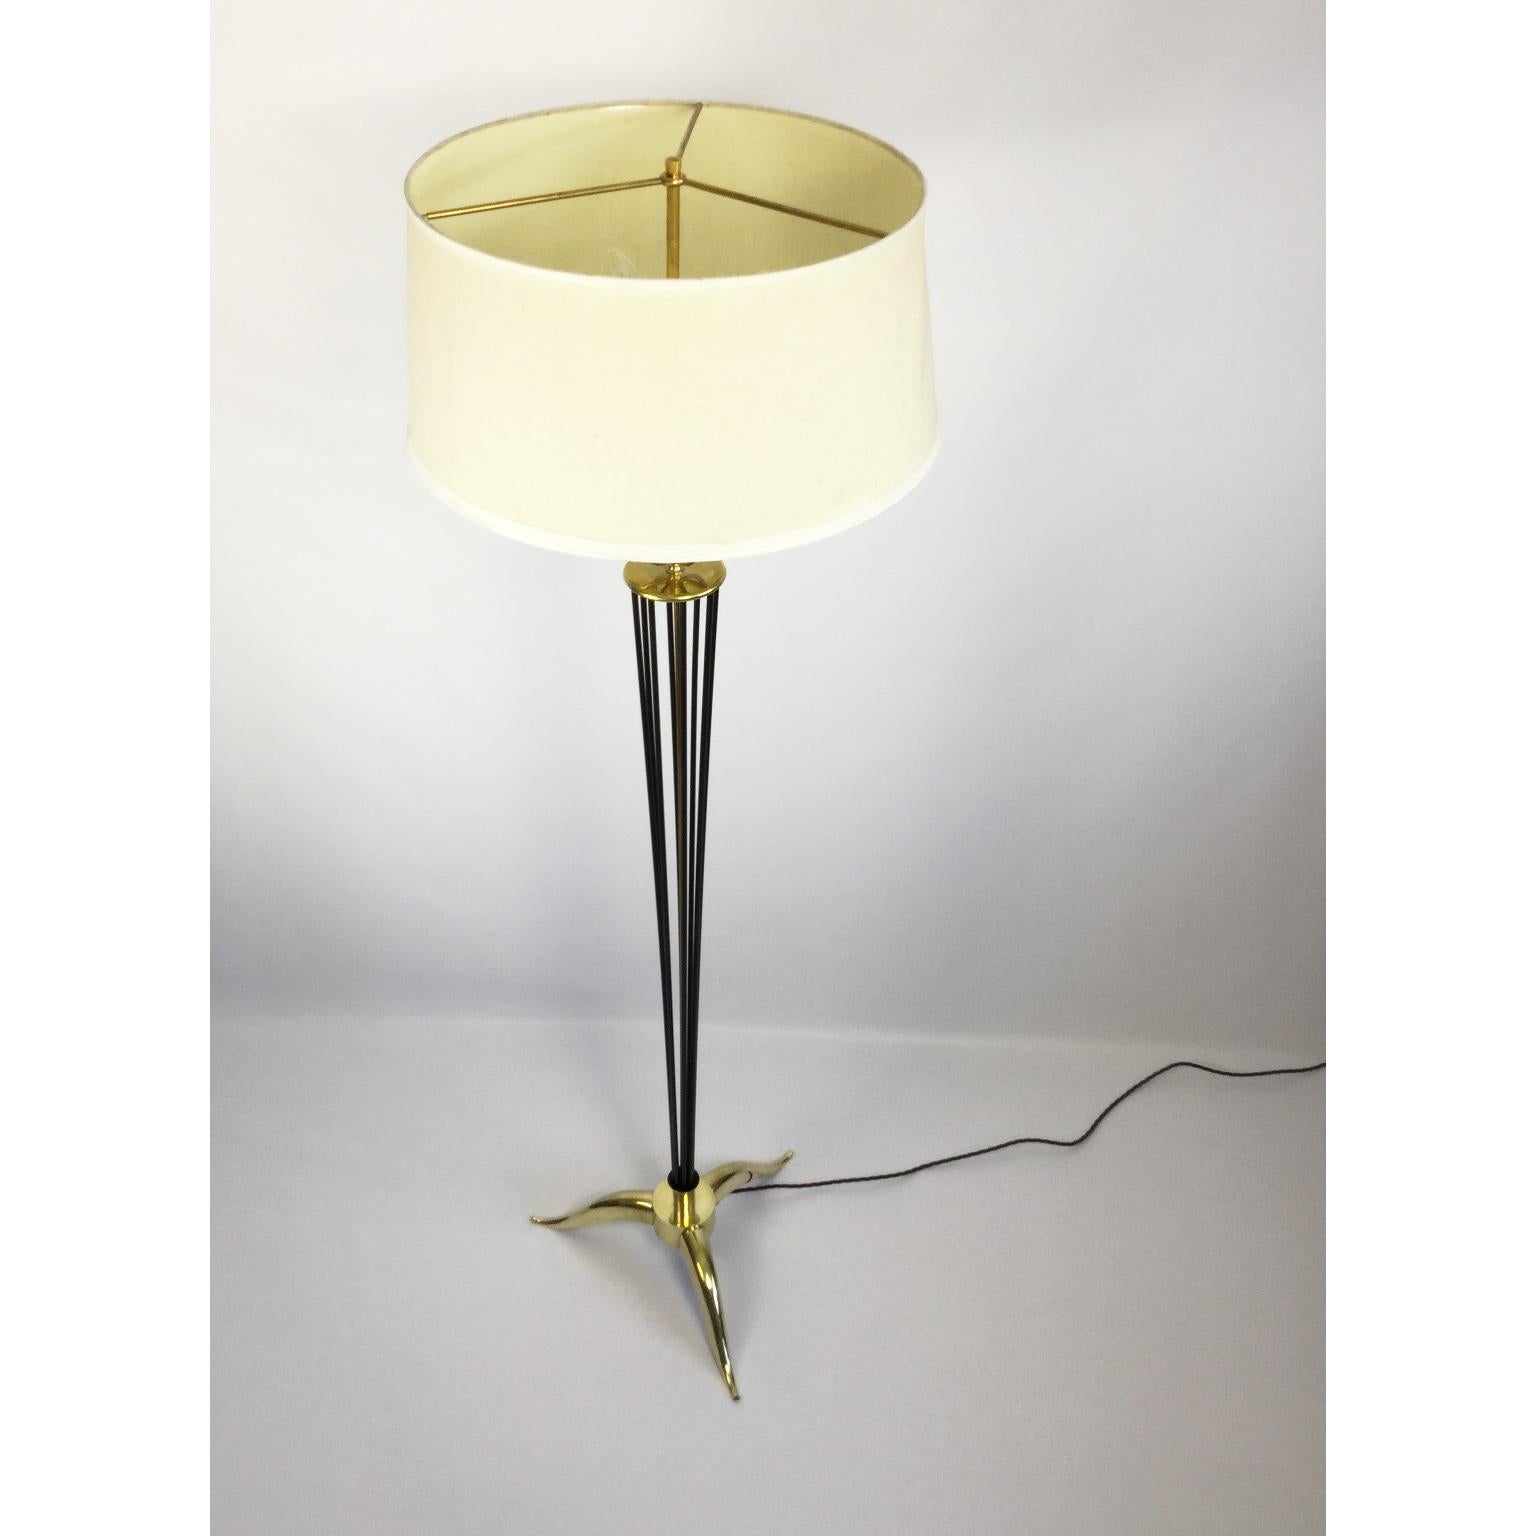 1950s Astrolabe Floor Lamp for Maison Arlus Model 926
Original linen shade with its own original frosted reflector glass.
Rewired with black cotton insulated cable.
The original linen shade has light wear and light fading from age and use but is